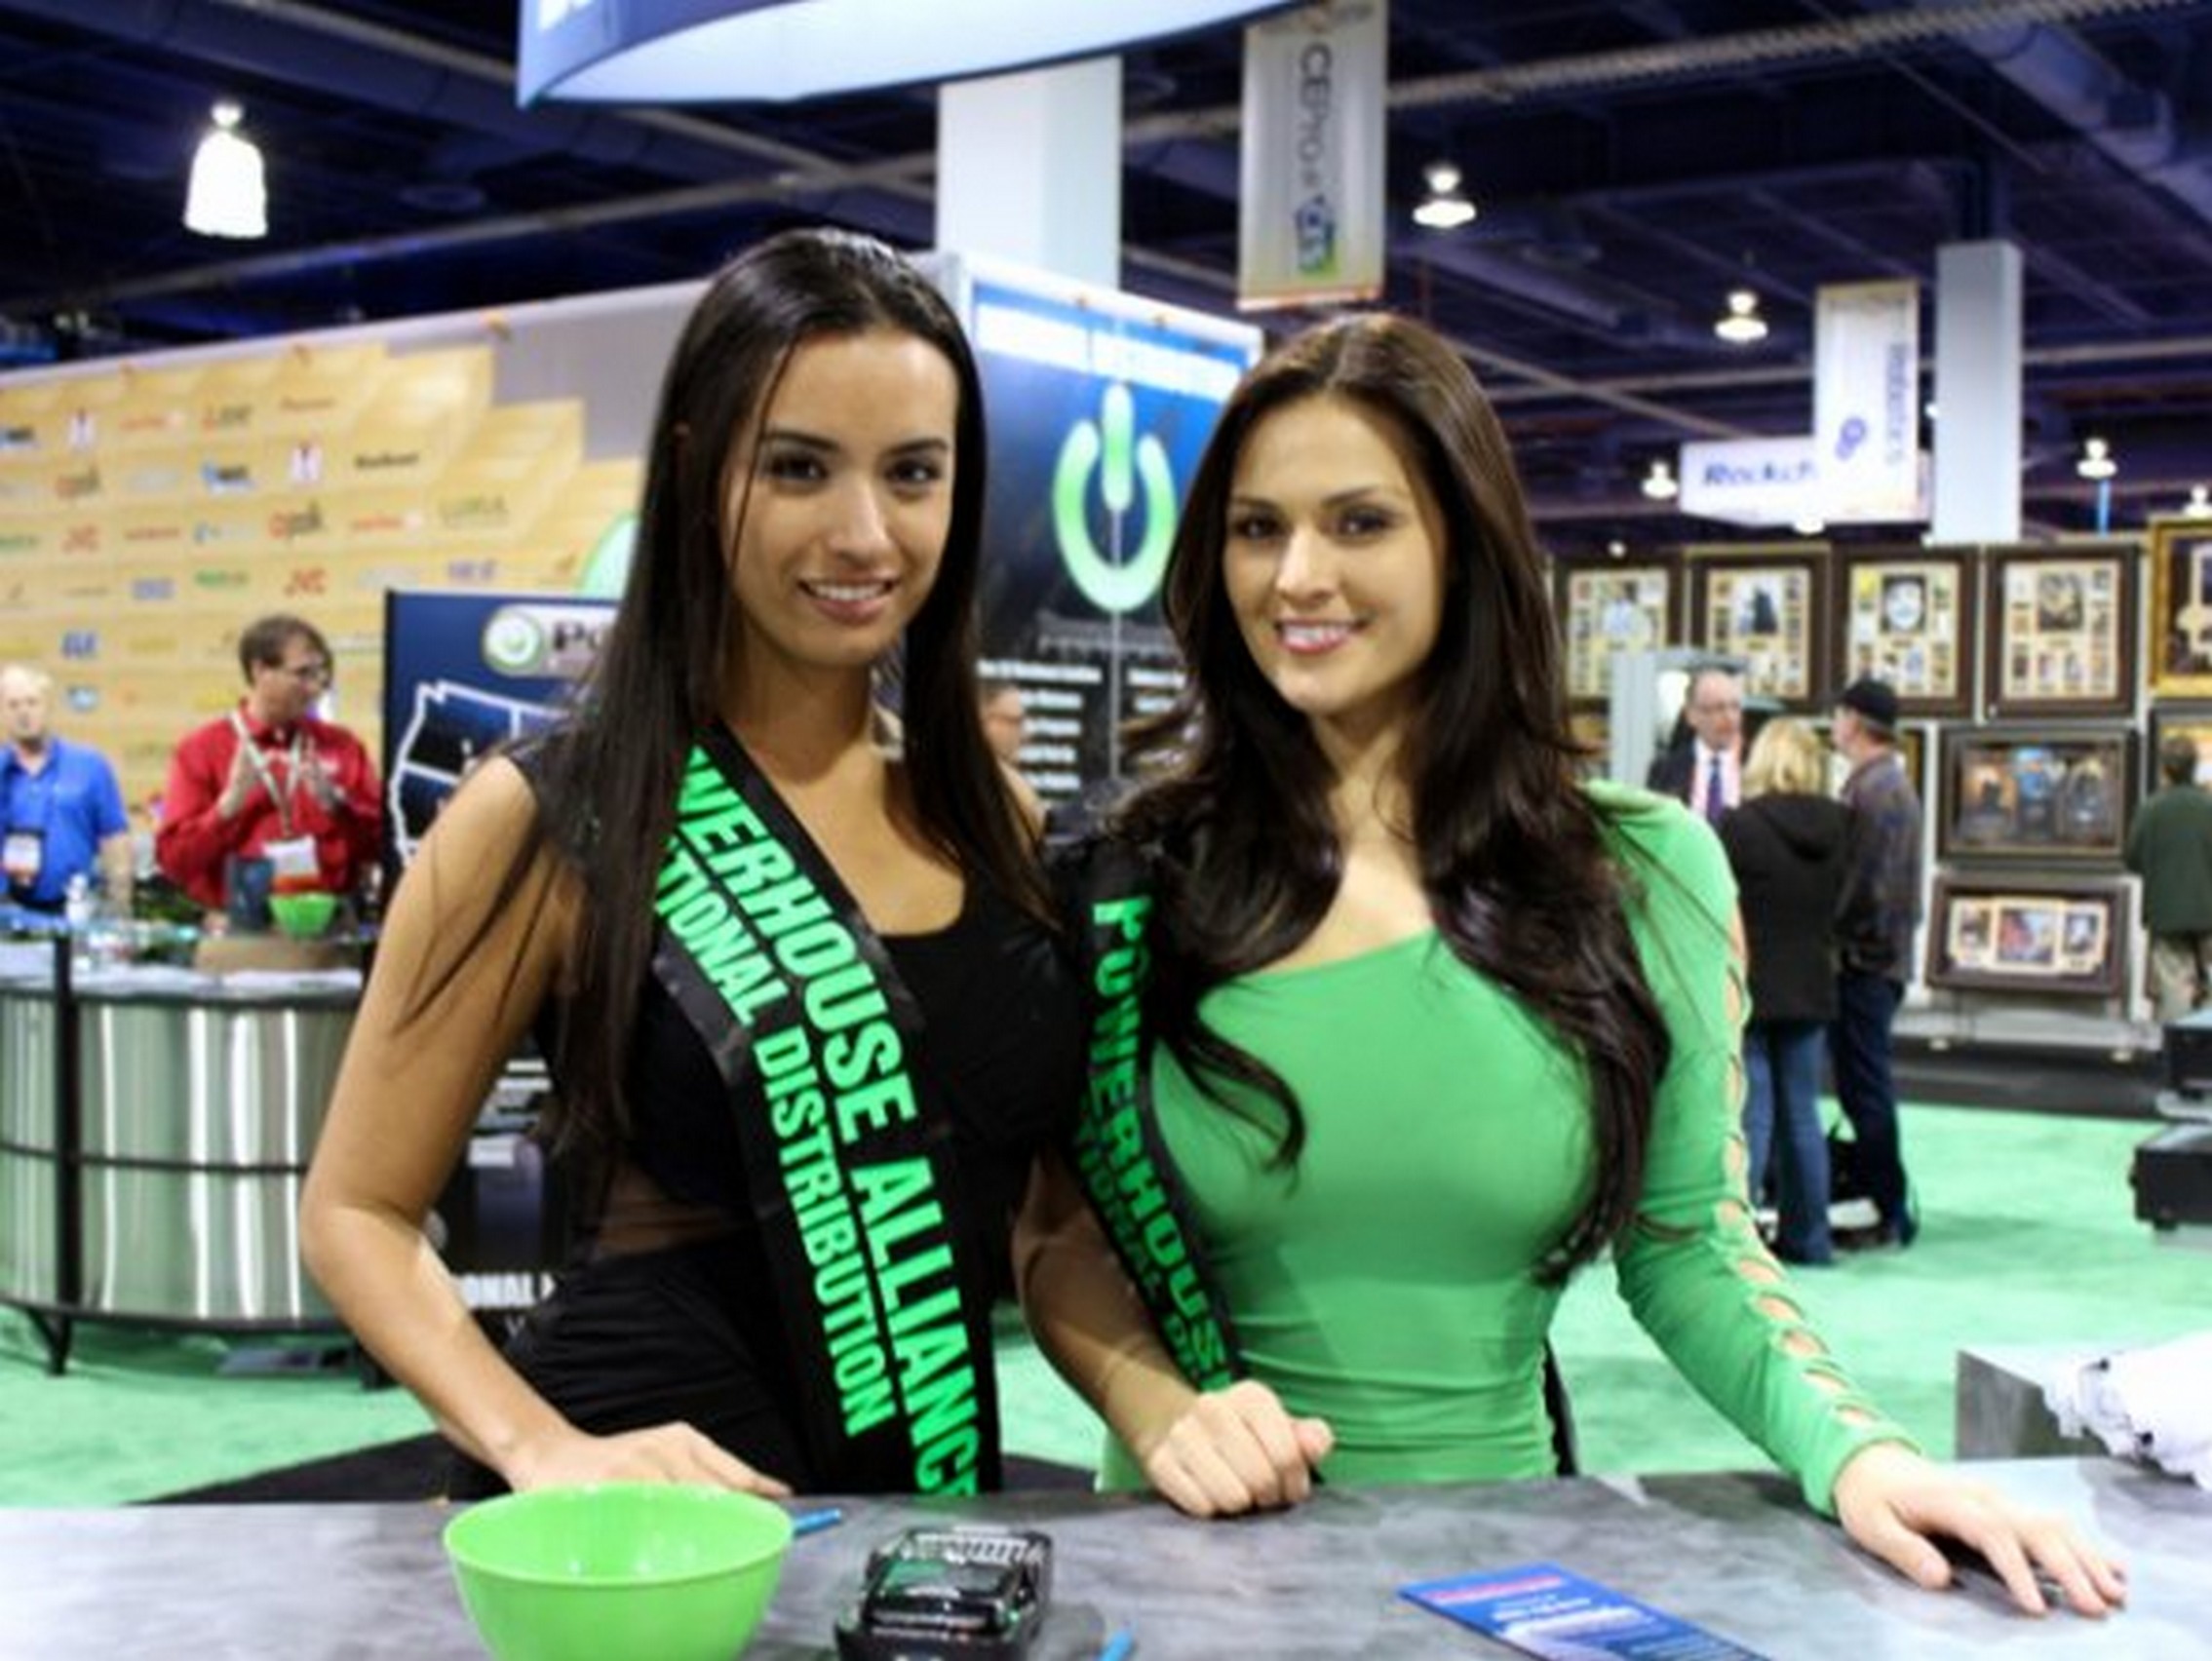 CES2013-boothbabes0026